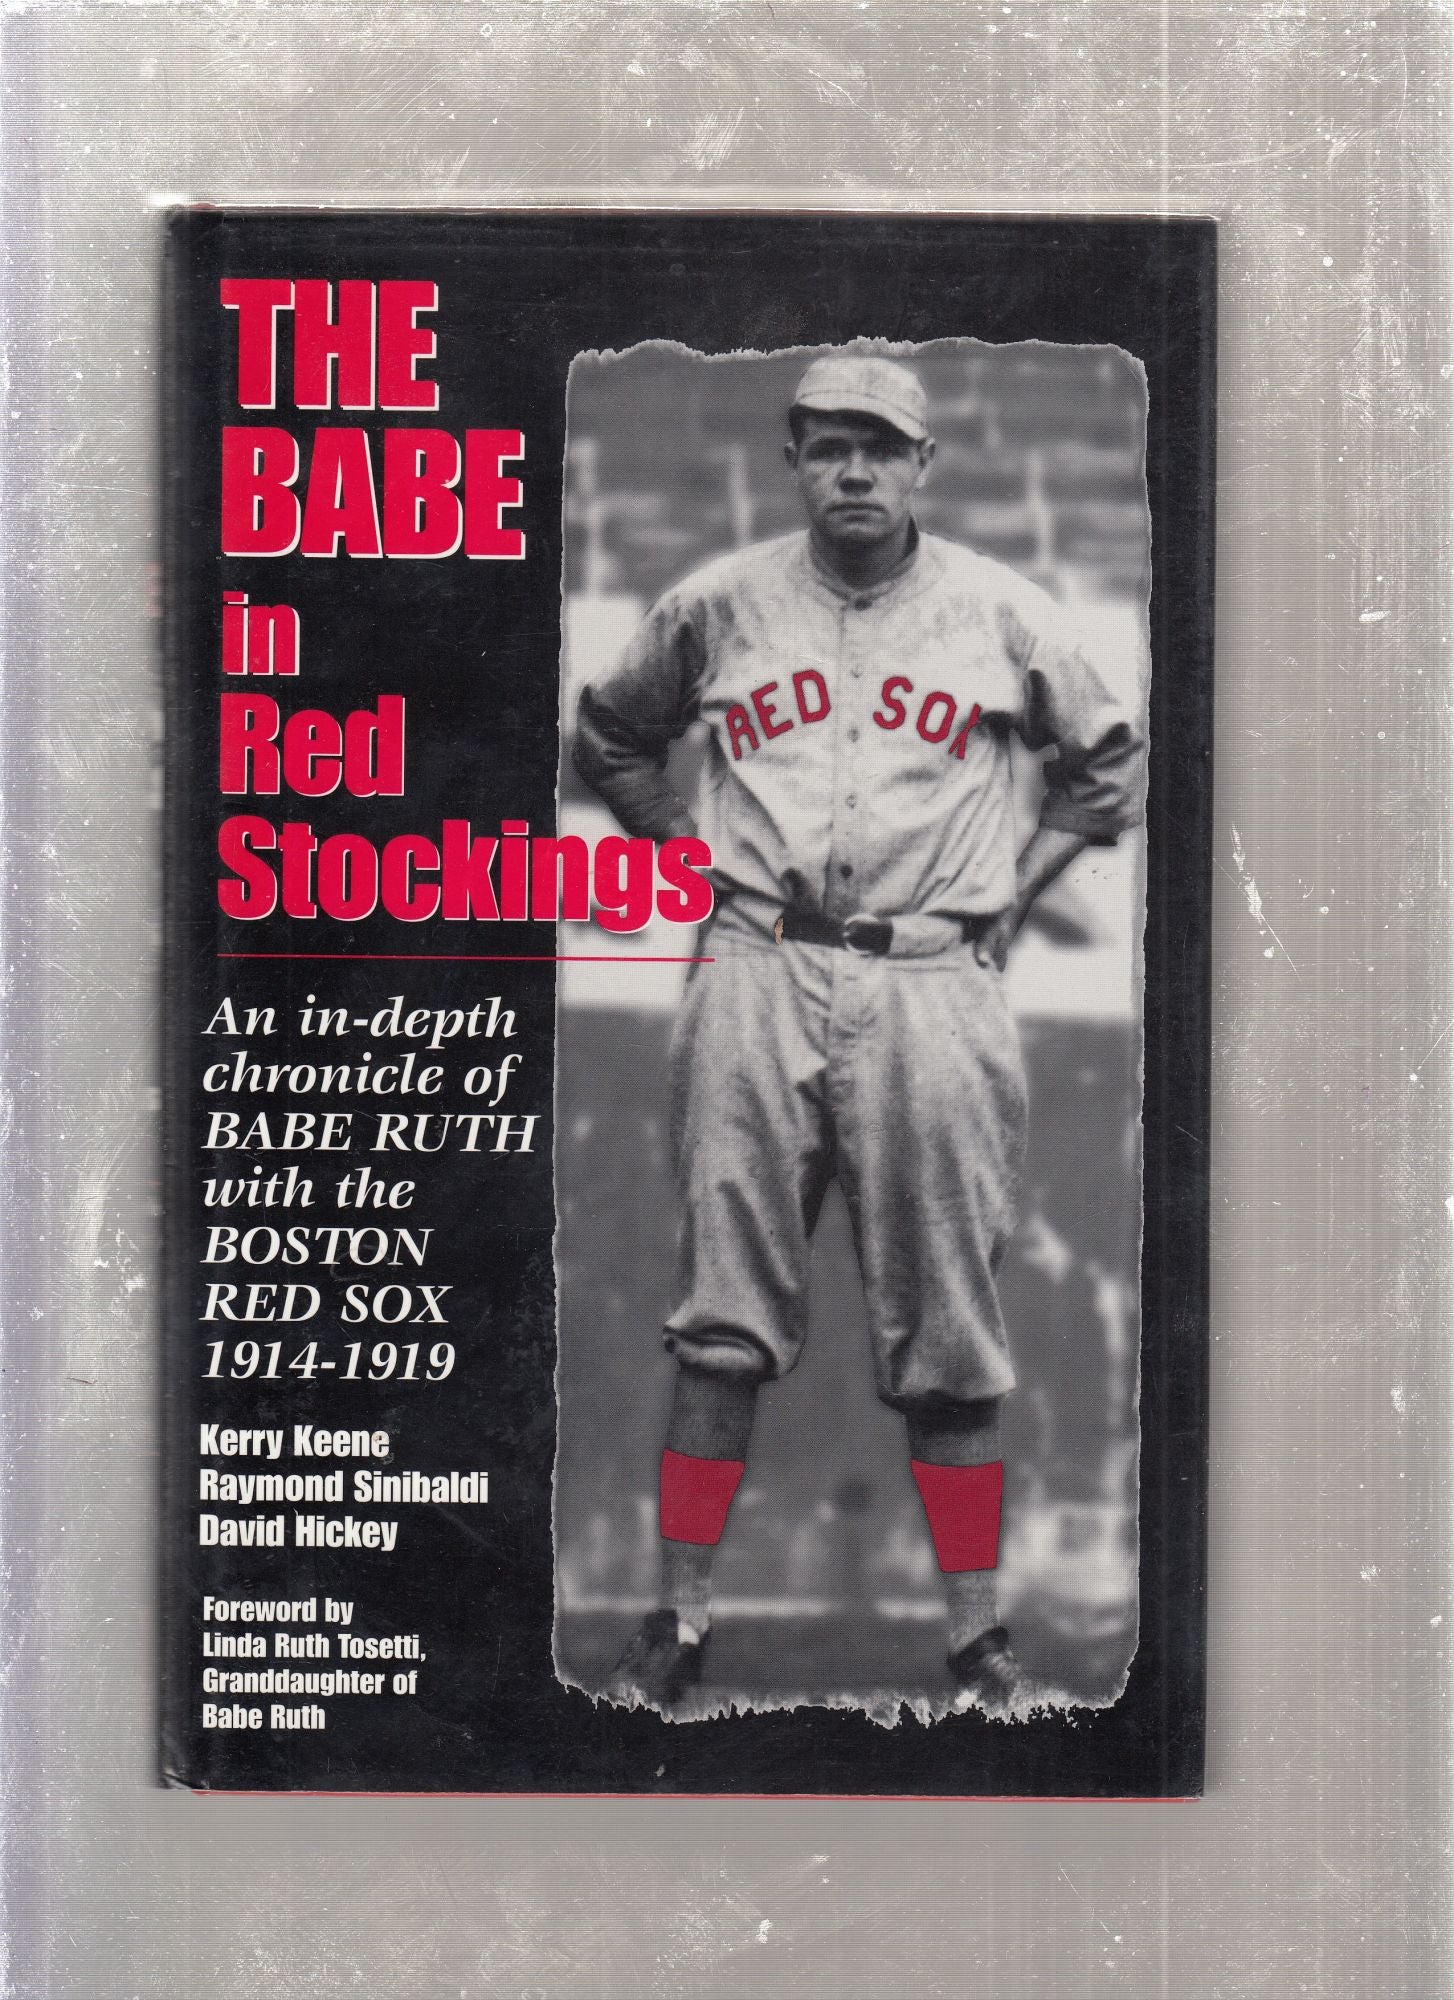 The Babe In Red Stockings: An In-depth Ccronicle of Babe Ruth with